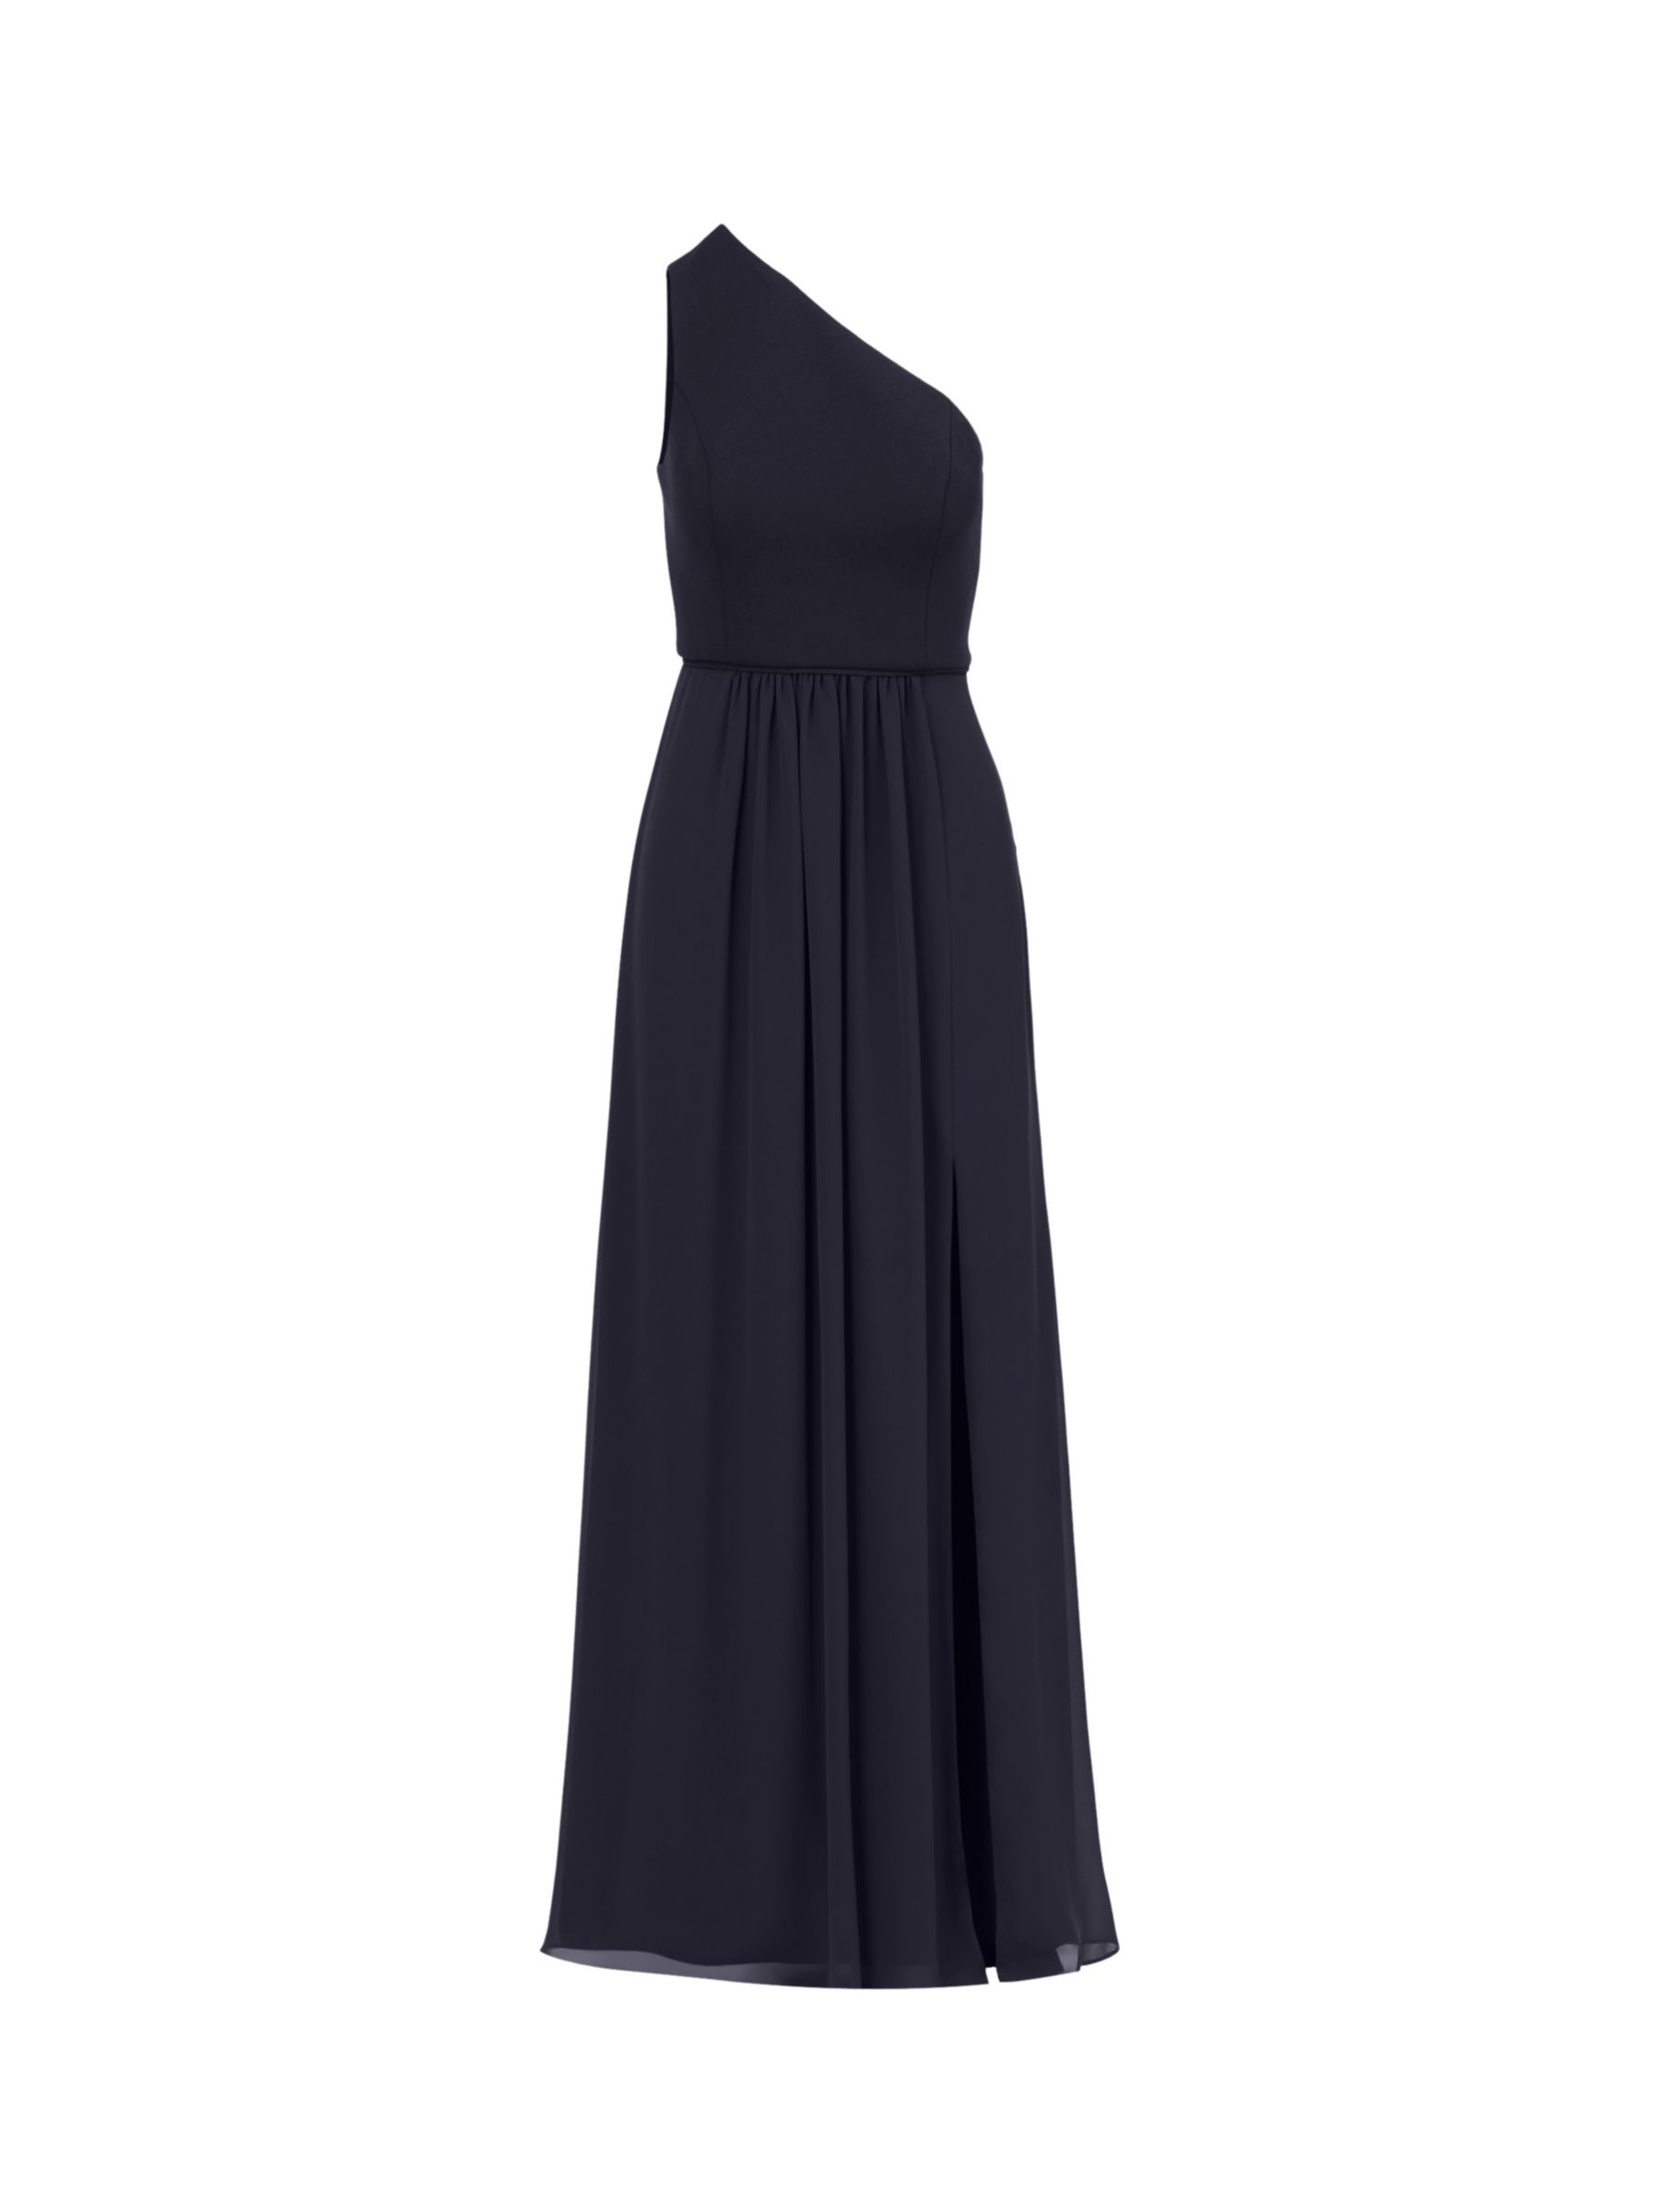 Adrianna Papell One Shoulder Chiffon Gown, Midnight, 6